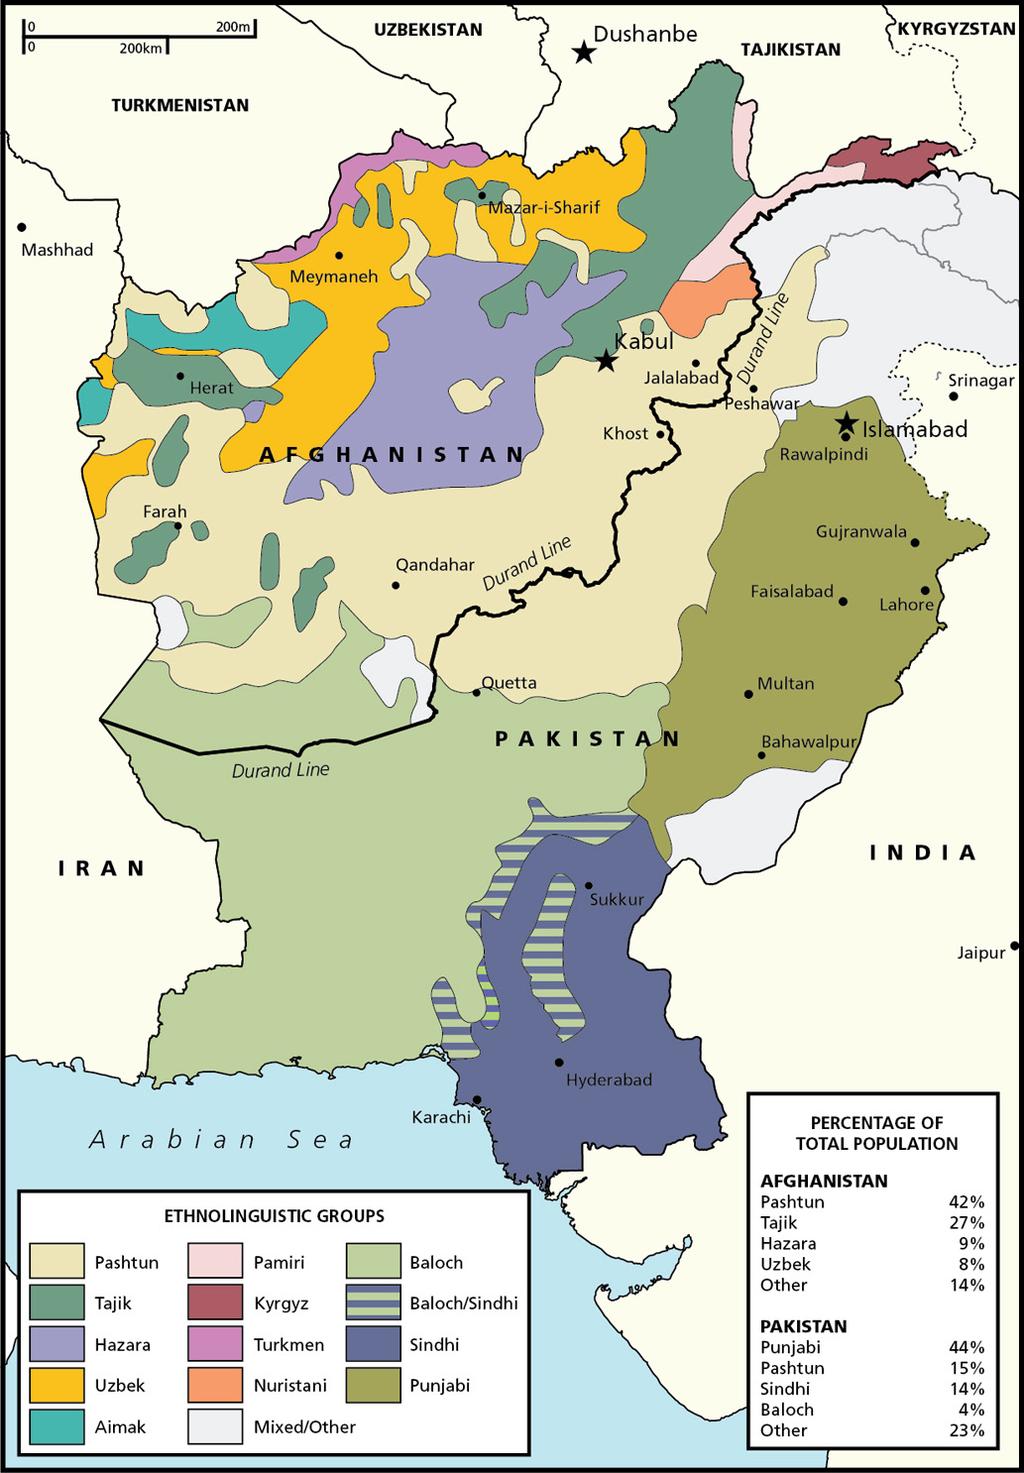 Map 1 3 3 National Geographic Education, Afghanistan and Pakistan Ethnic Groups, http://education.